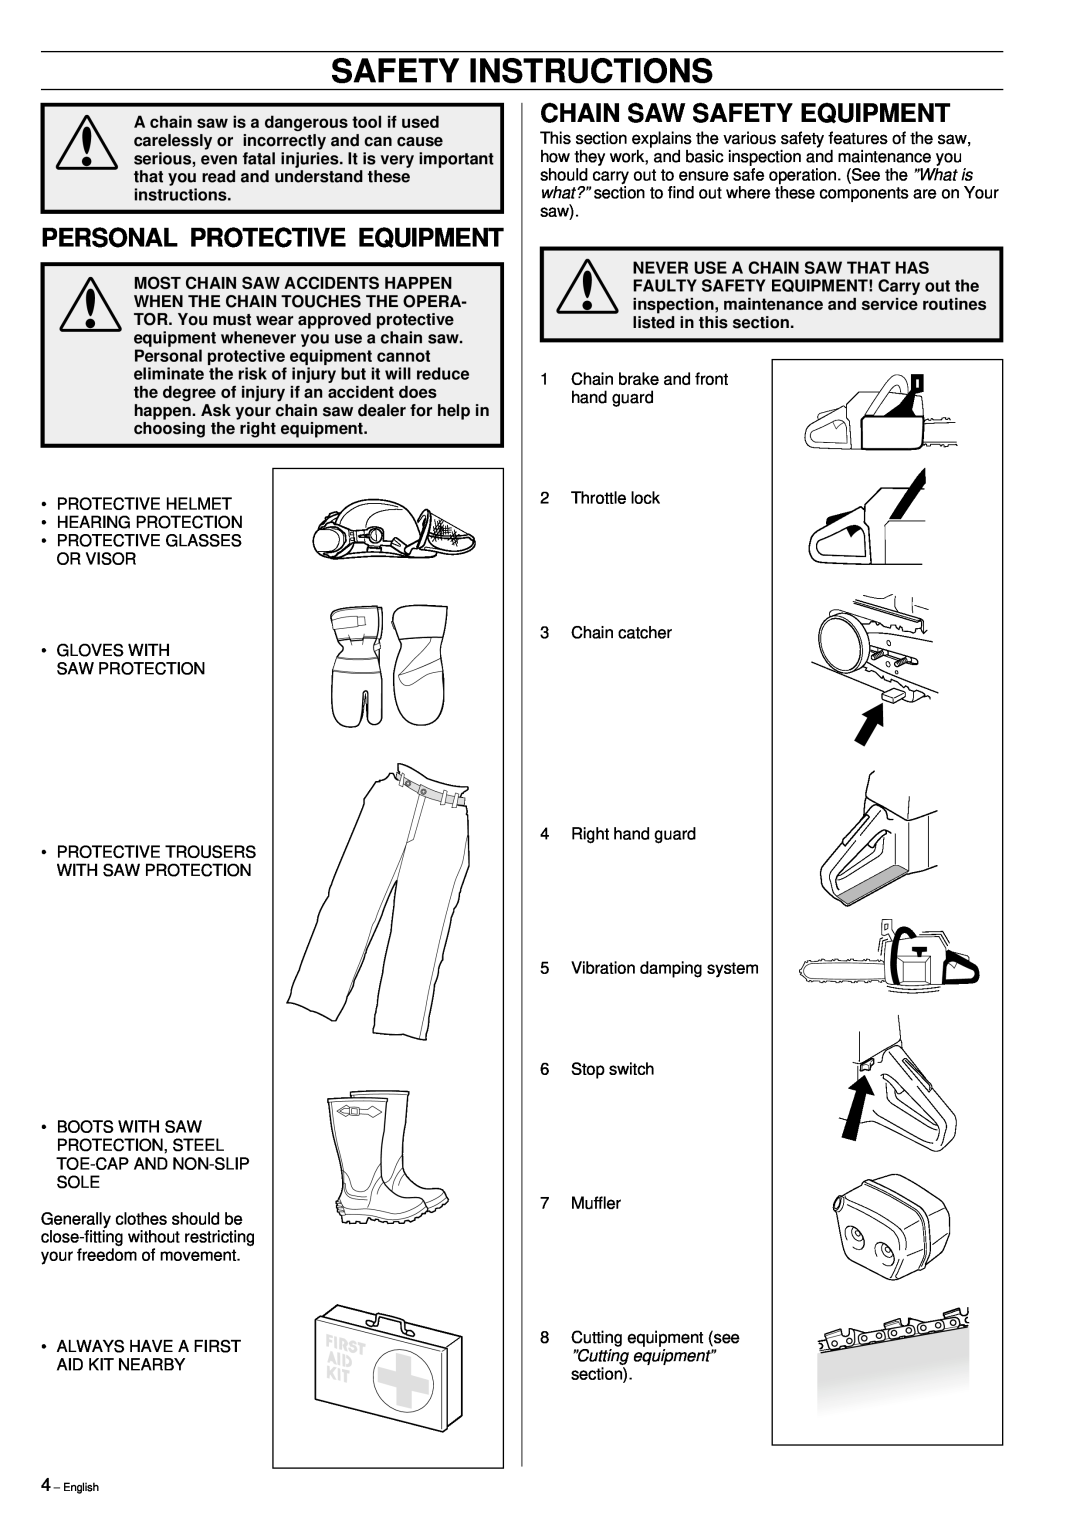 Husqvarna 395XP manual Safety Instructions, Personal Protective Equipment, Chain Saw Safety Equipment 